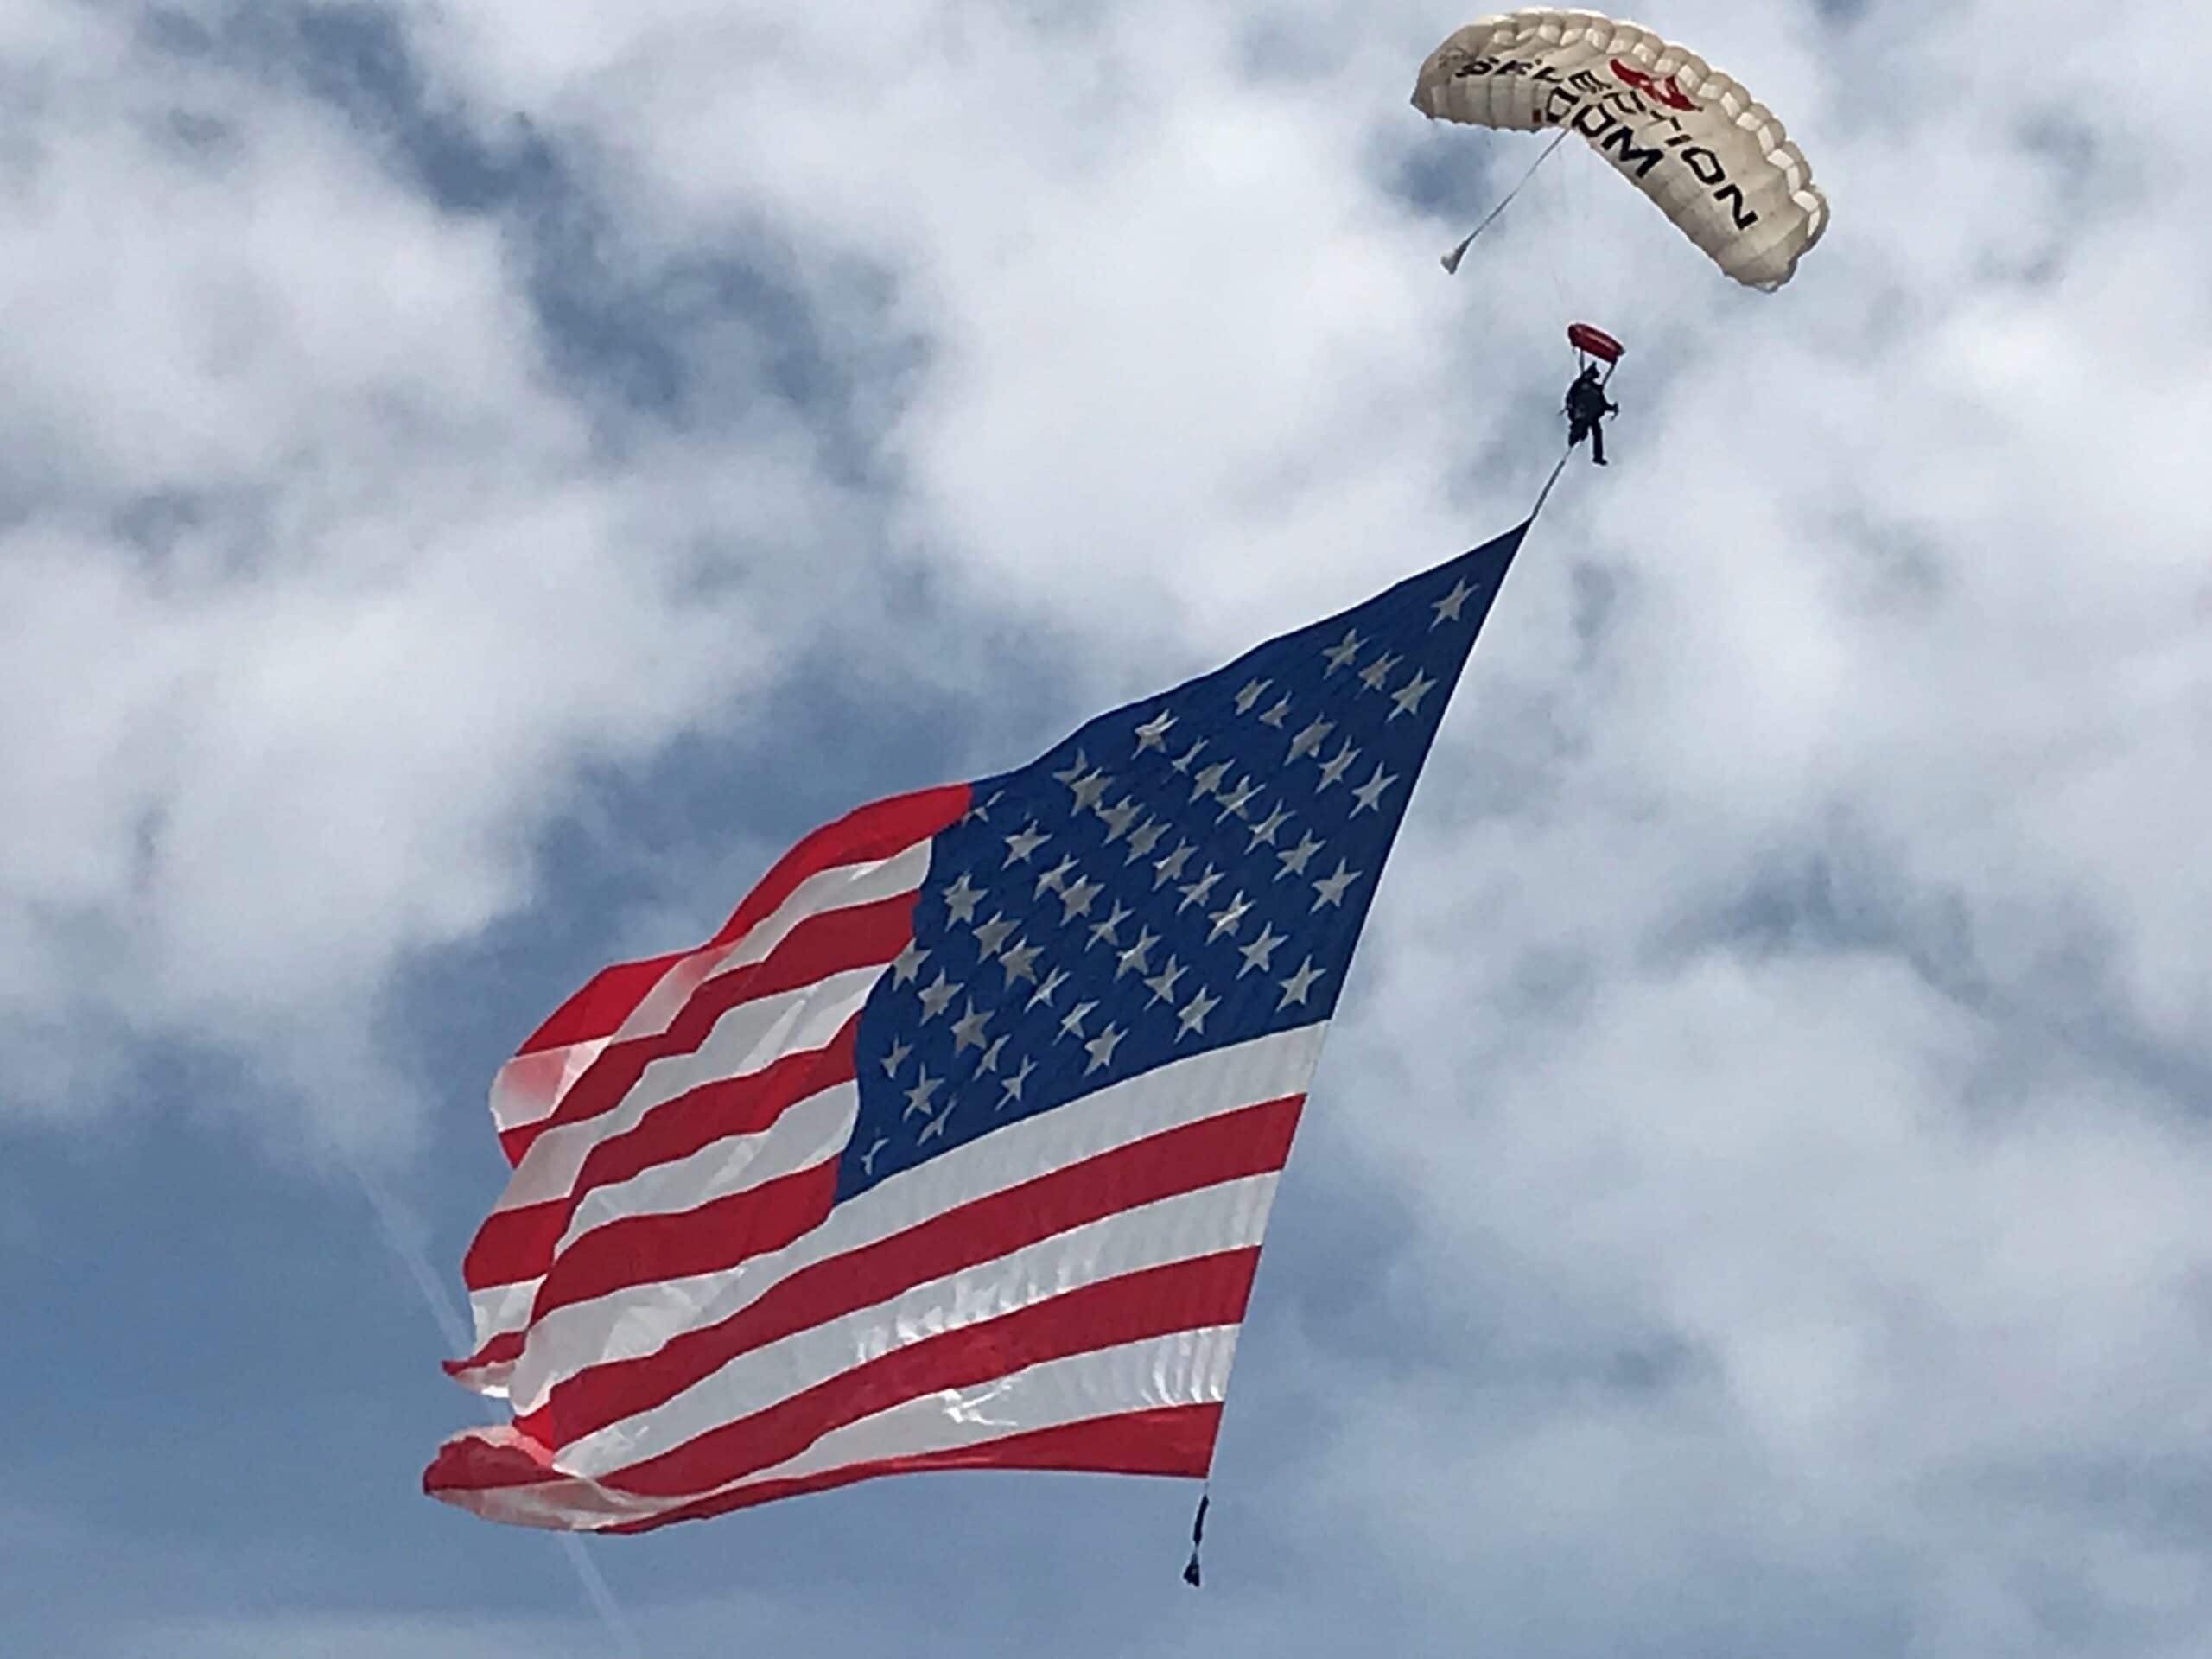 Team Fastrax Skydivers To Entertain Spectators At 2019 Military Bowl